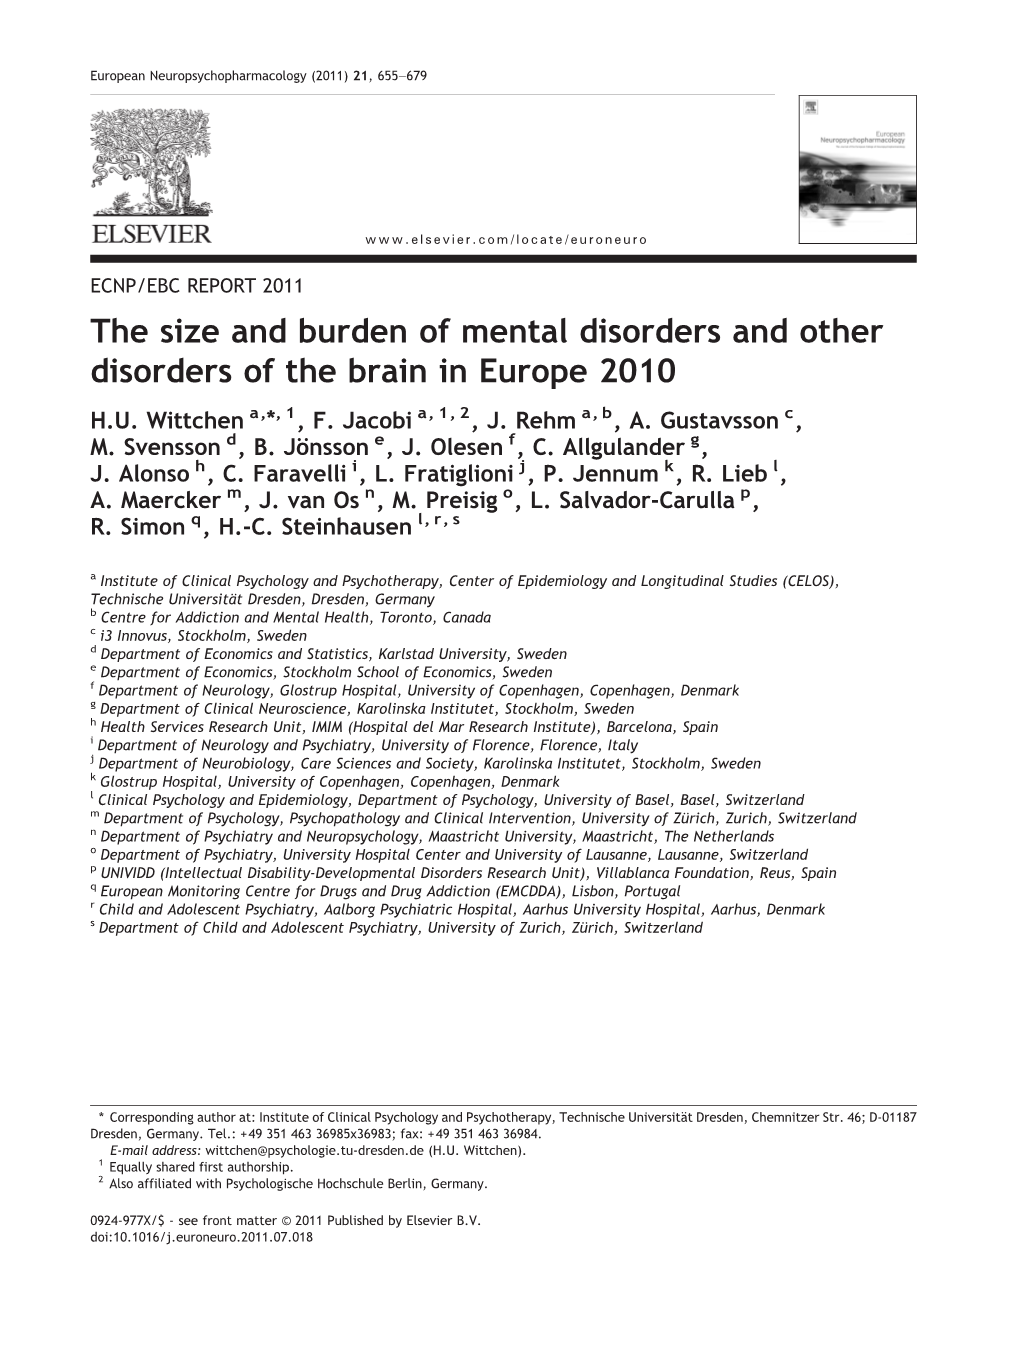 The Size and Burden of Mental Disorders and Other Disorders of the Brain in Europe 2010 H.U